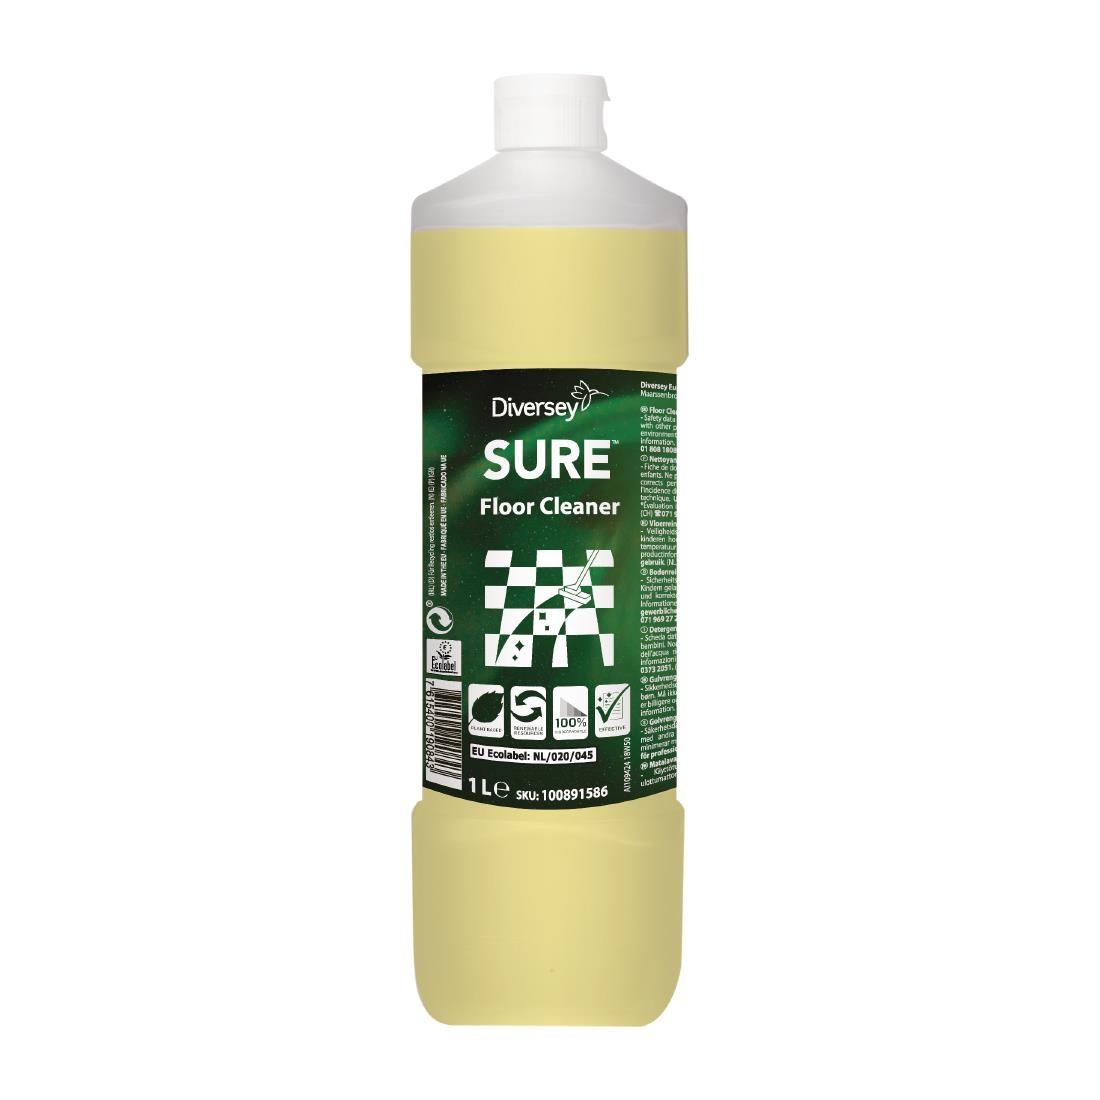 SURE Floor Cleaner Concentrate 1Ltr (6 Pack) - FA229  - 1